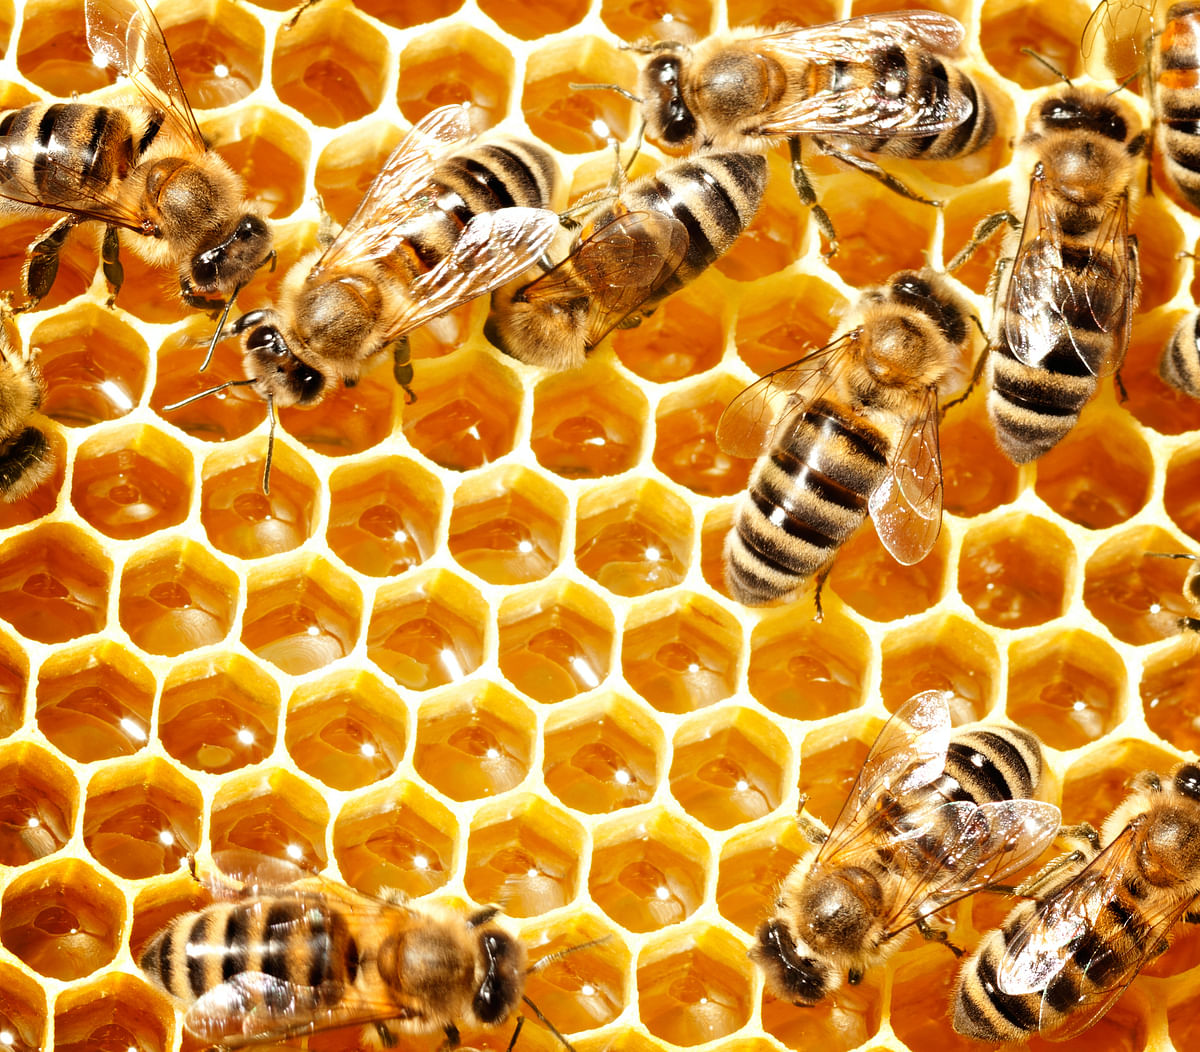 With bees disappearing, bee keepers and researchers alike are deeply concerned about the future of the world’s food.